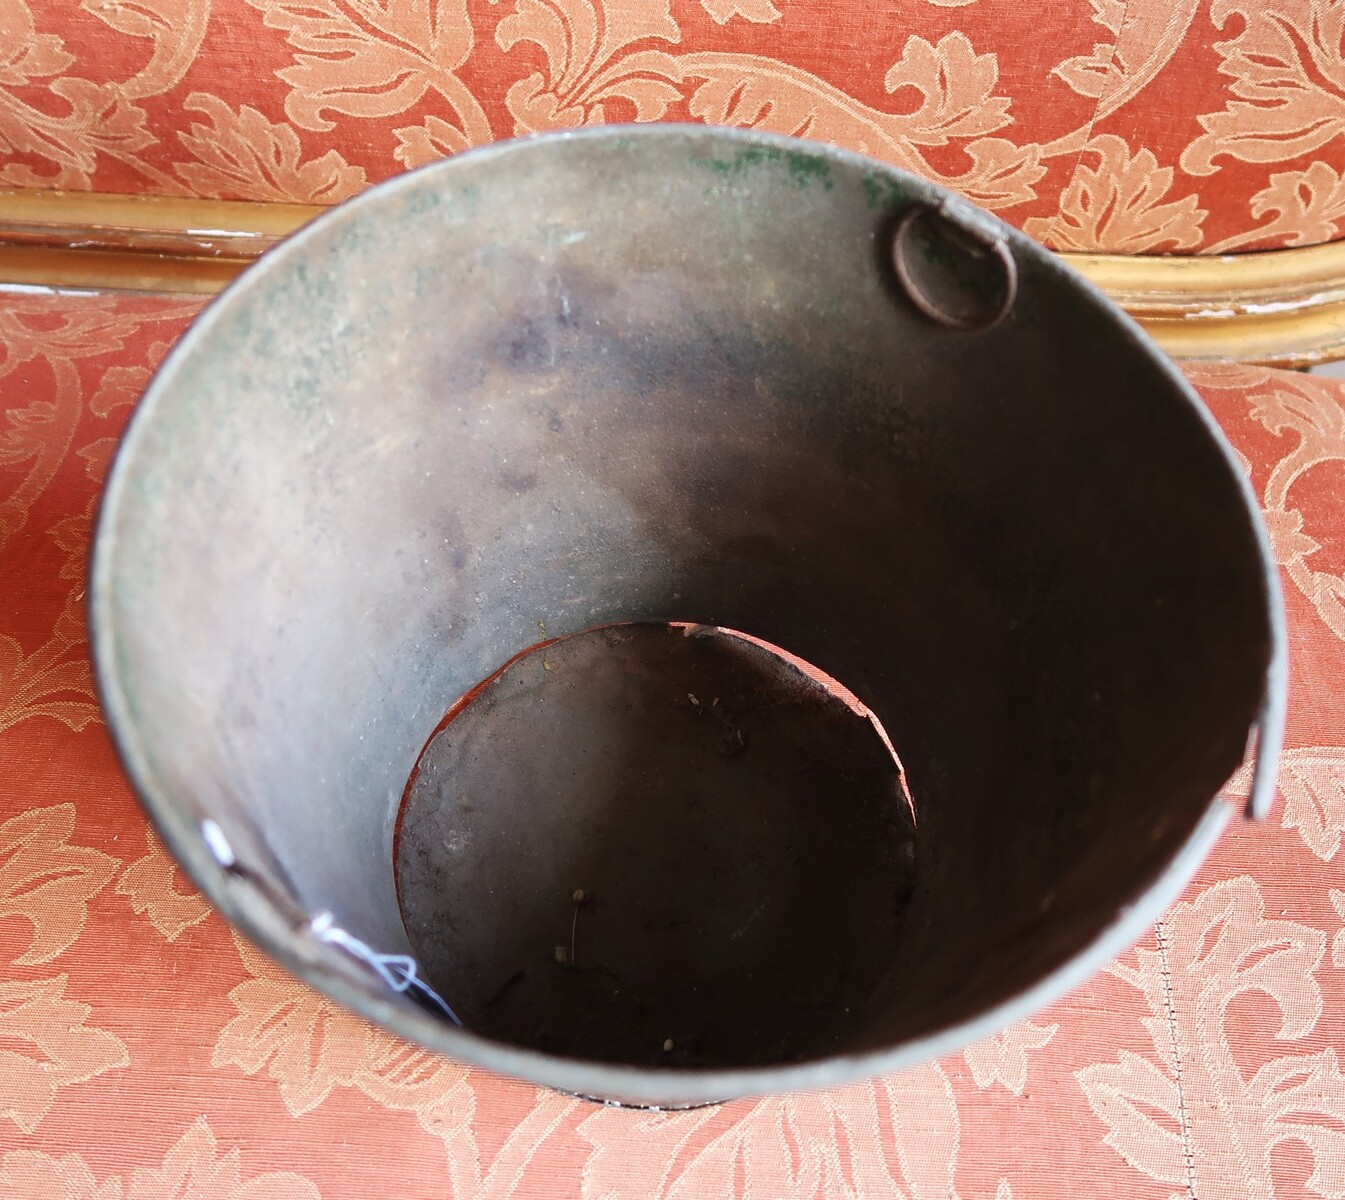 Chinese style cachepot 